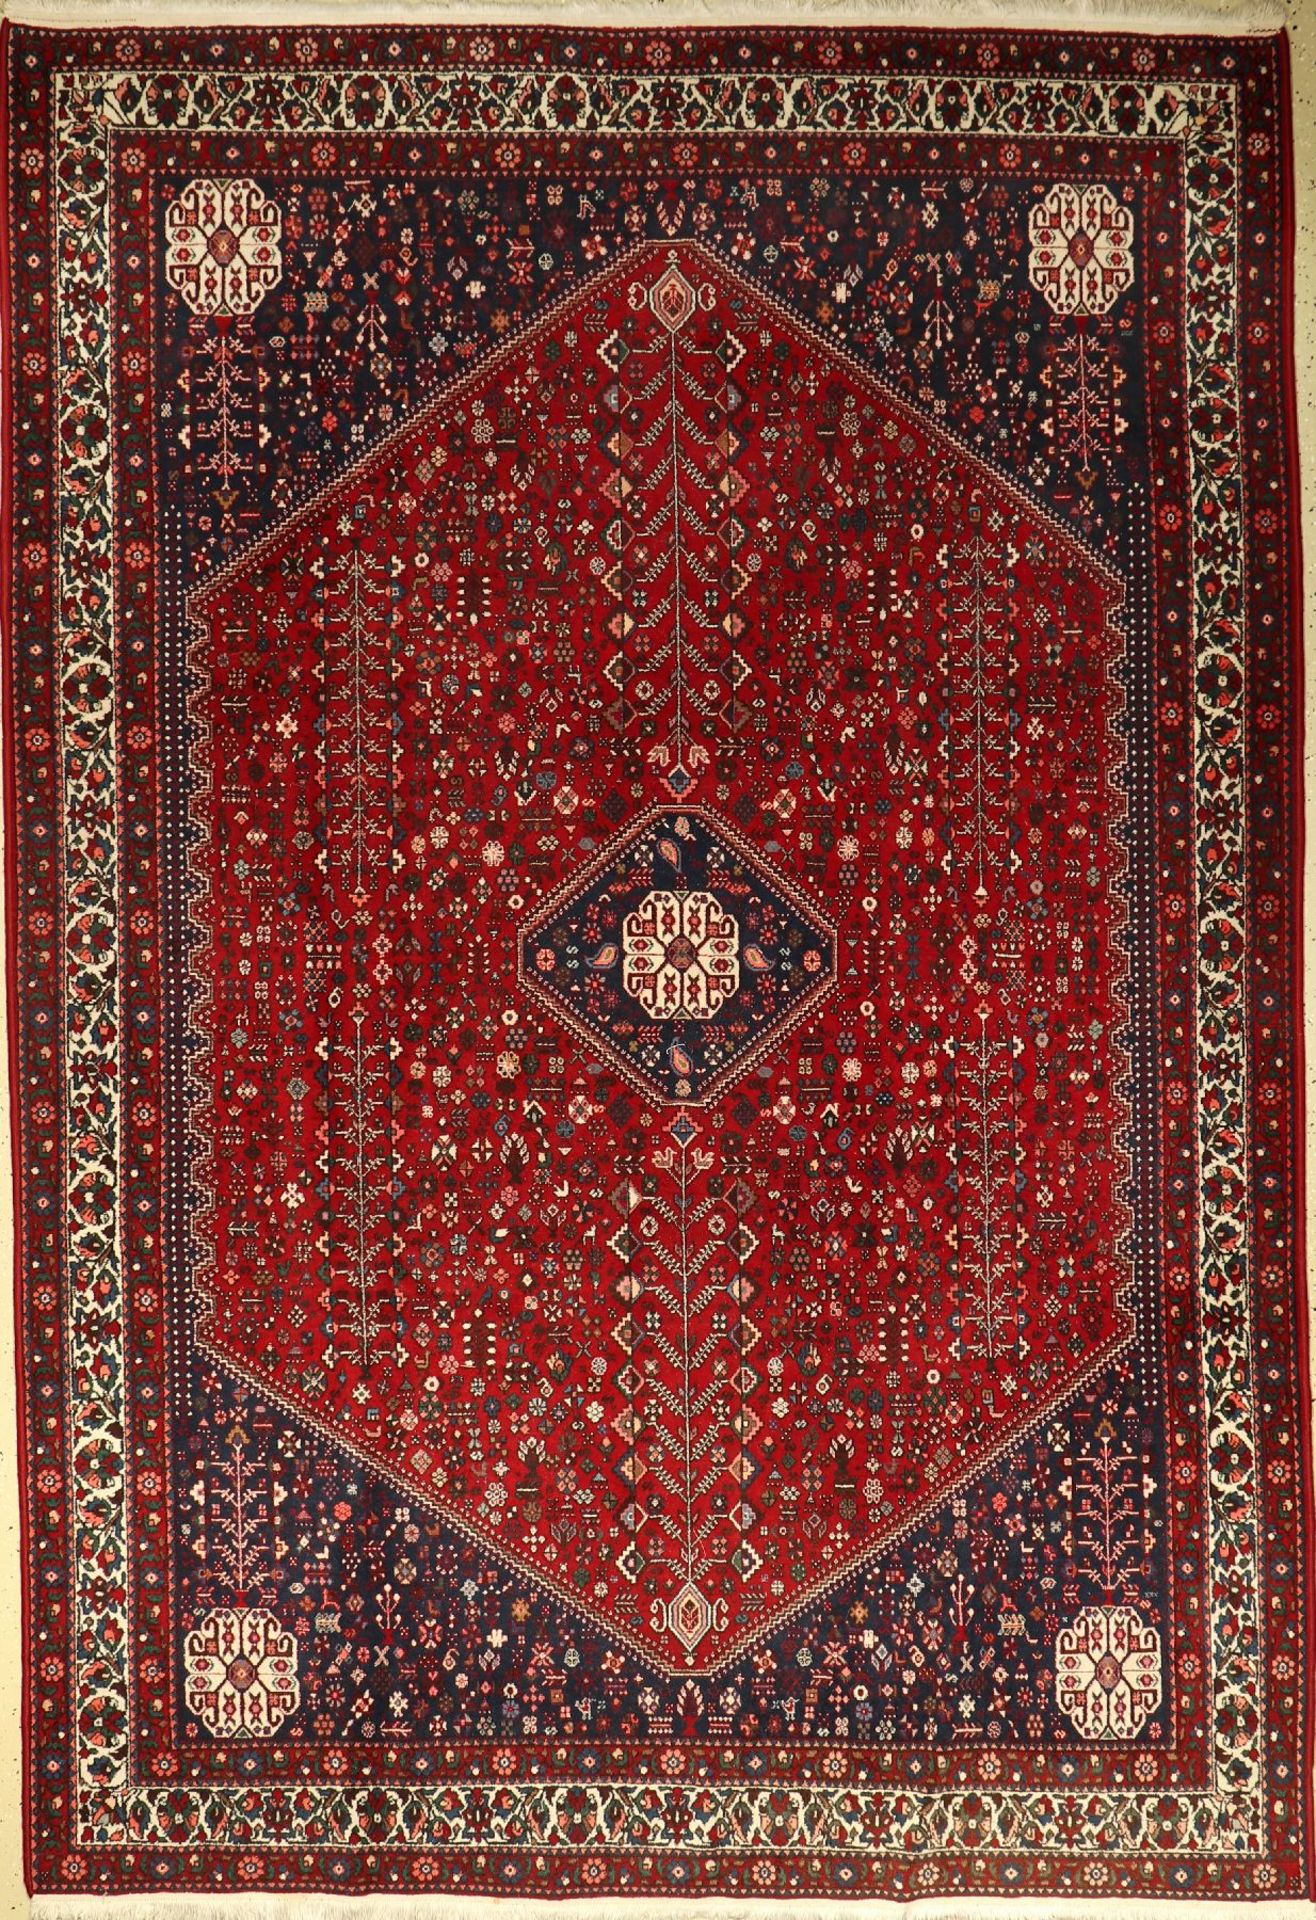 Abadeh, Persien, ca. 40 Jahre, Wolle auf Baumwolle, ca. 302 x 208 cm, EHZ: 2Abadeh rug, Persia,